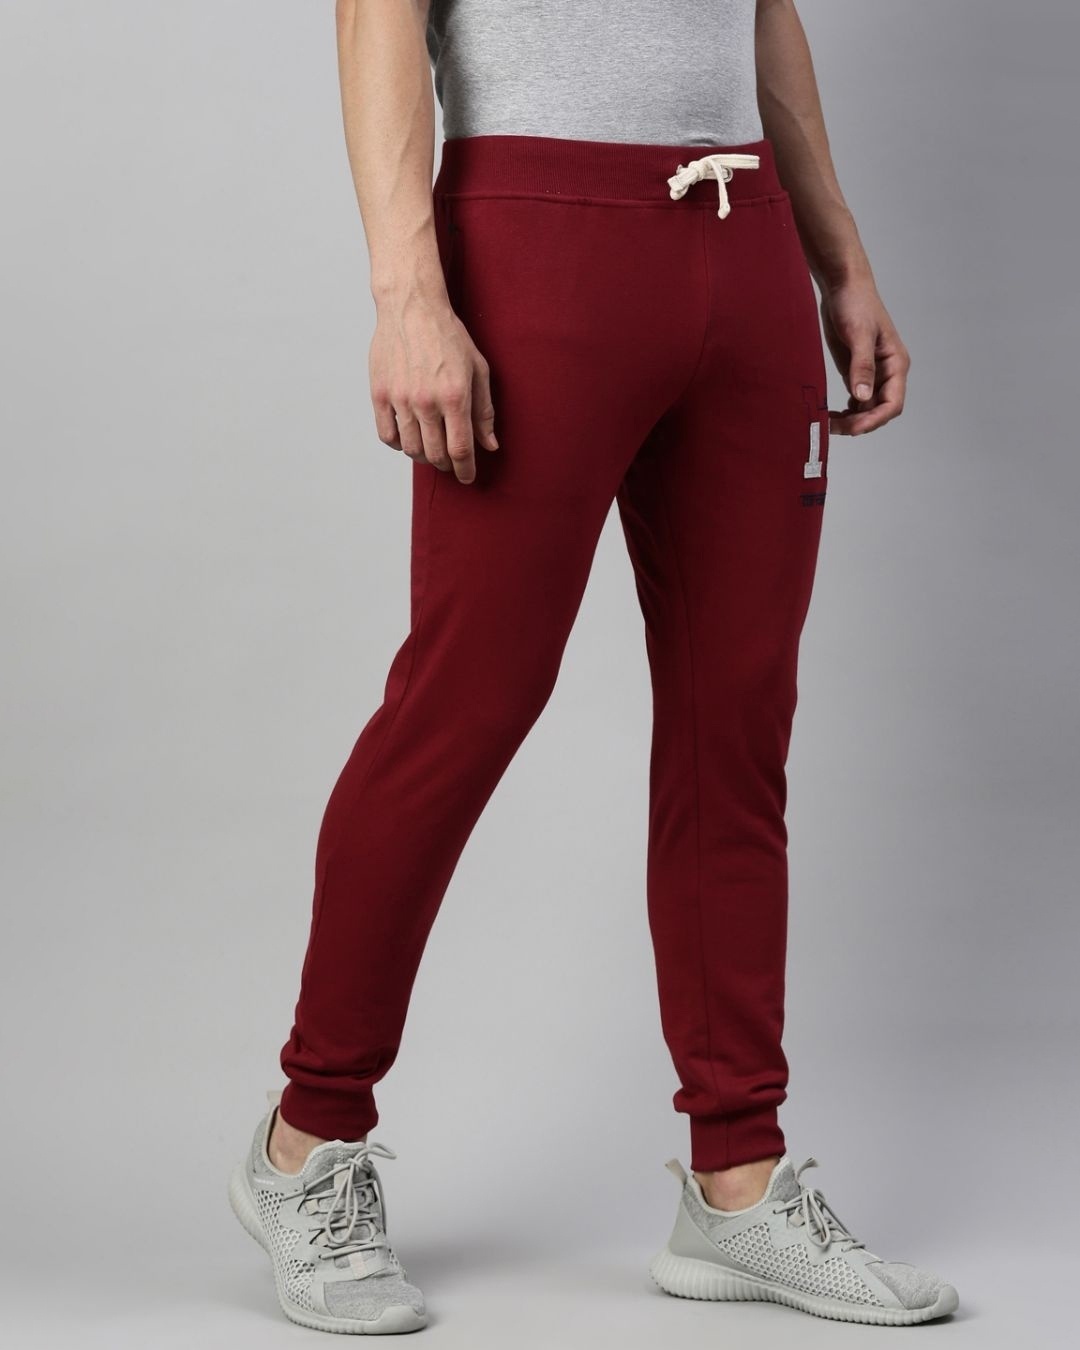 Buy Men's Maroon Embroidered Slim Fit Joggers for Men Maroon Online at ...